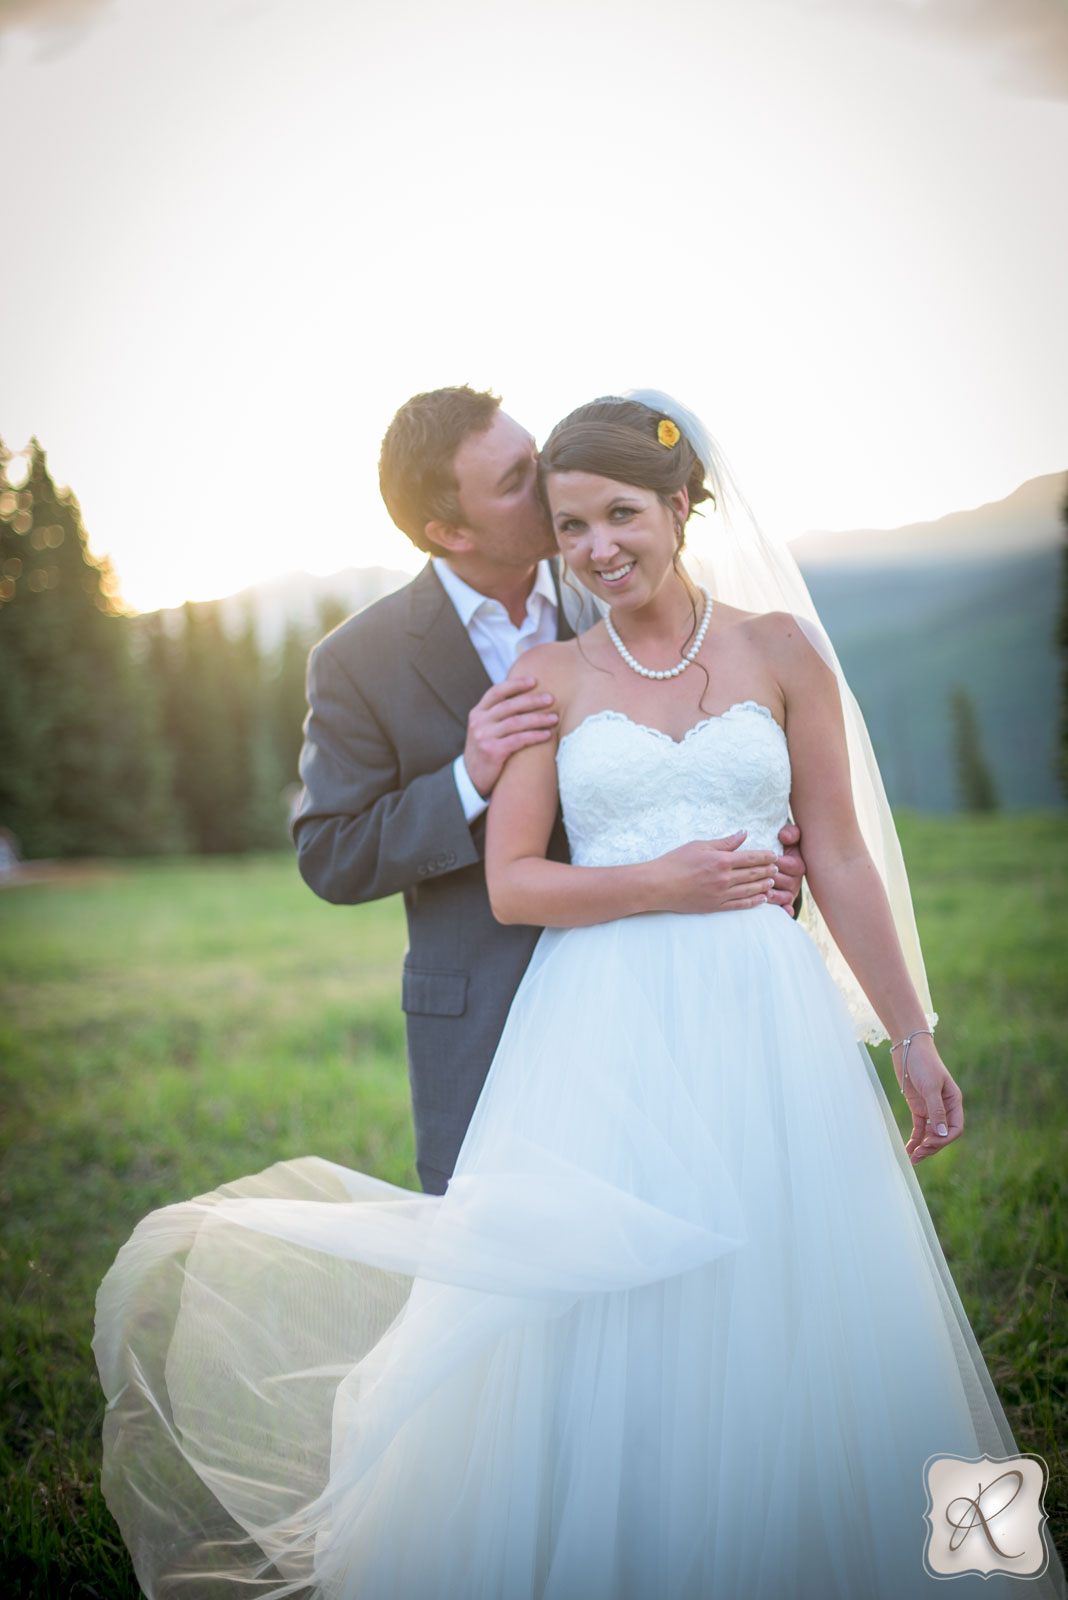 Wedding by Allison Ragsdale Photography